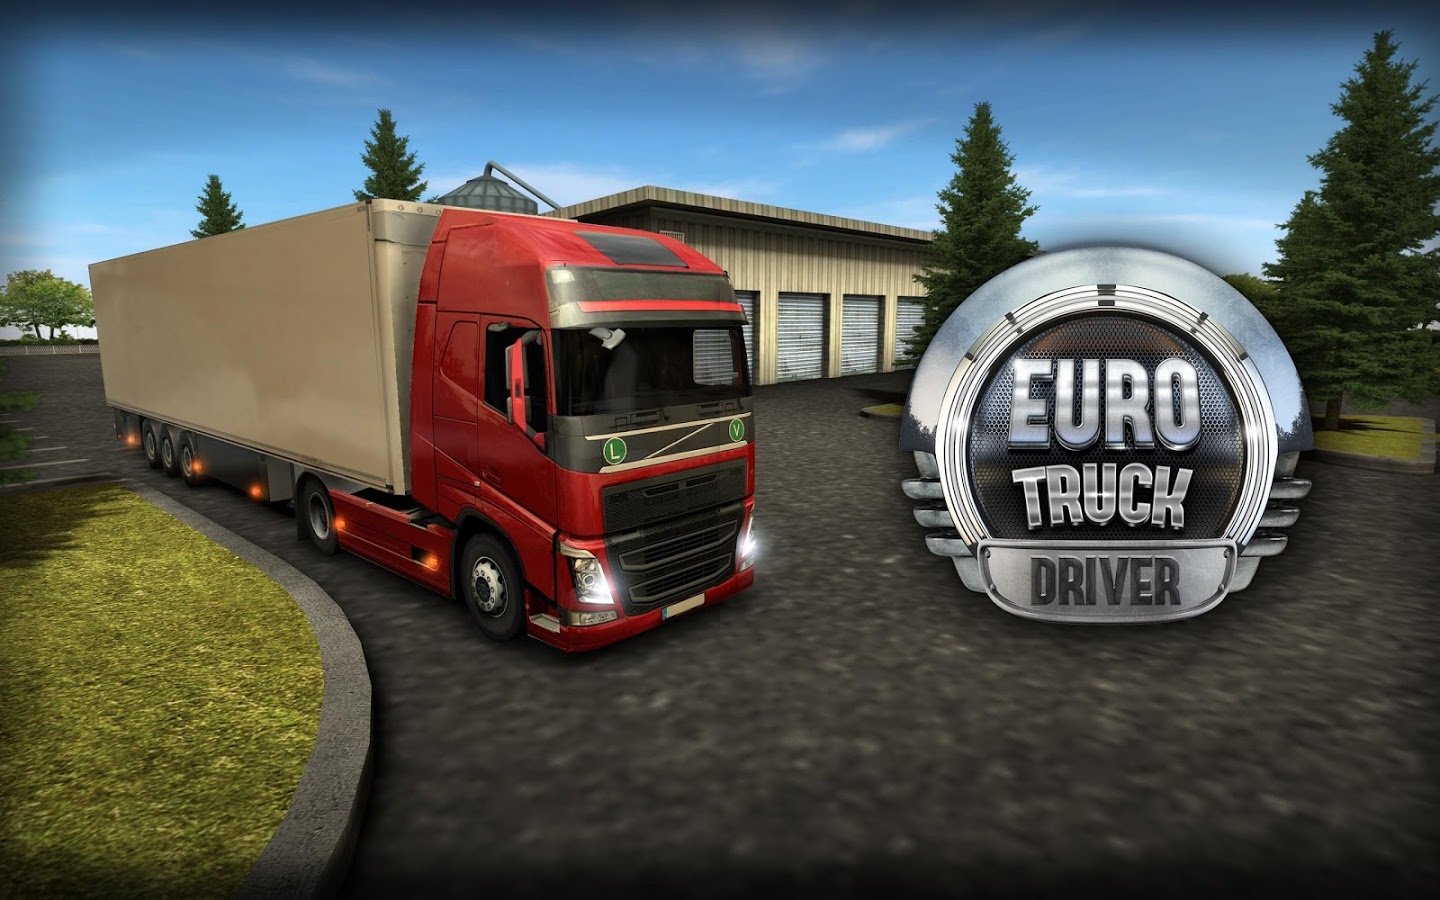 download scania truck driving for free